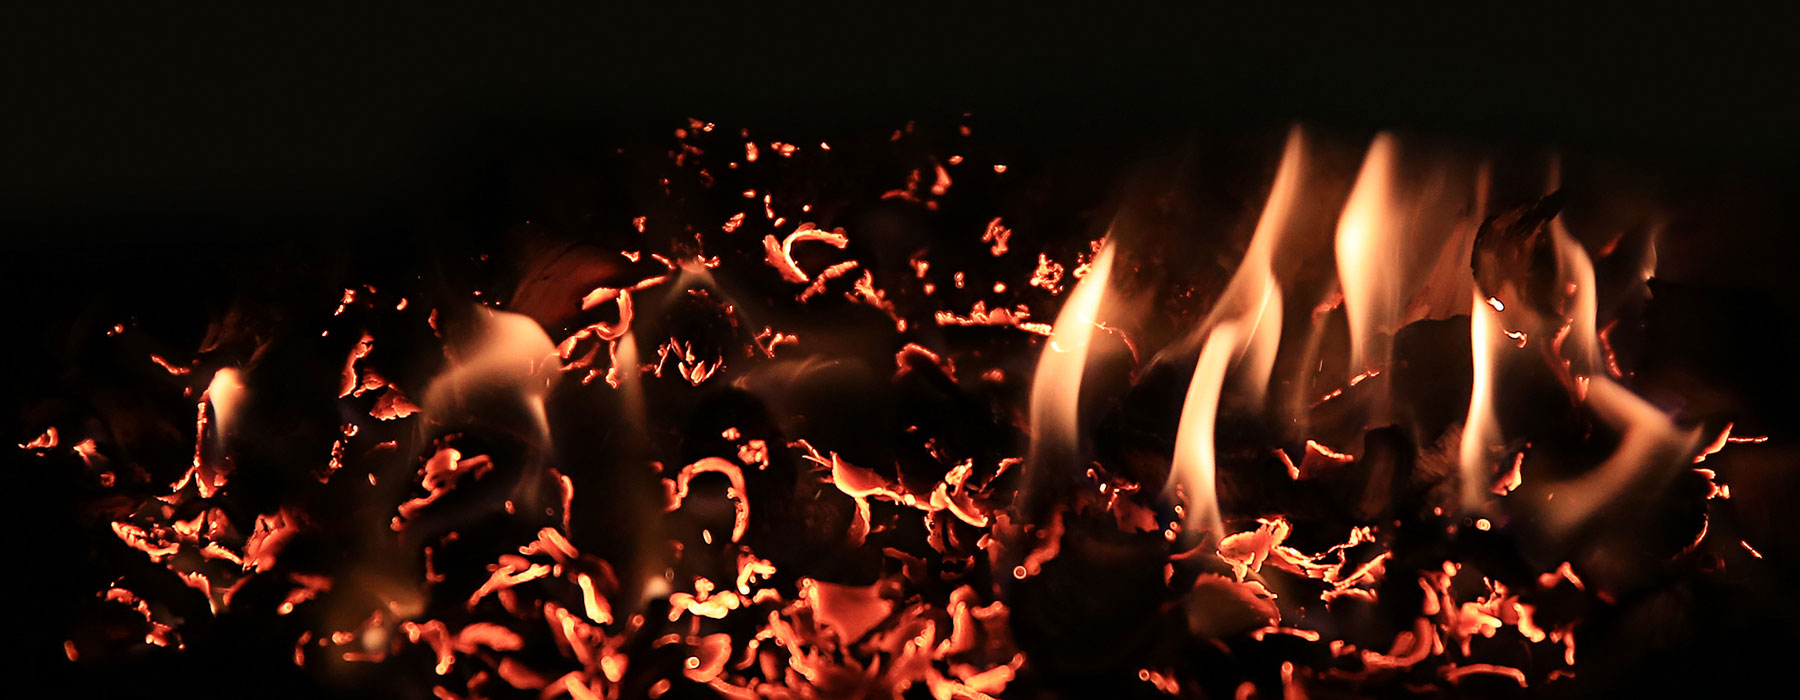 burning coals with flames